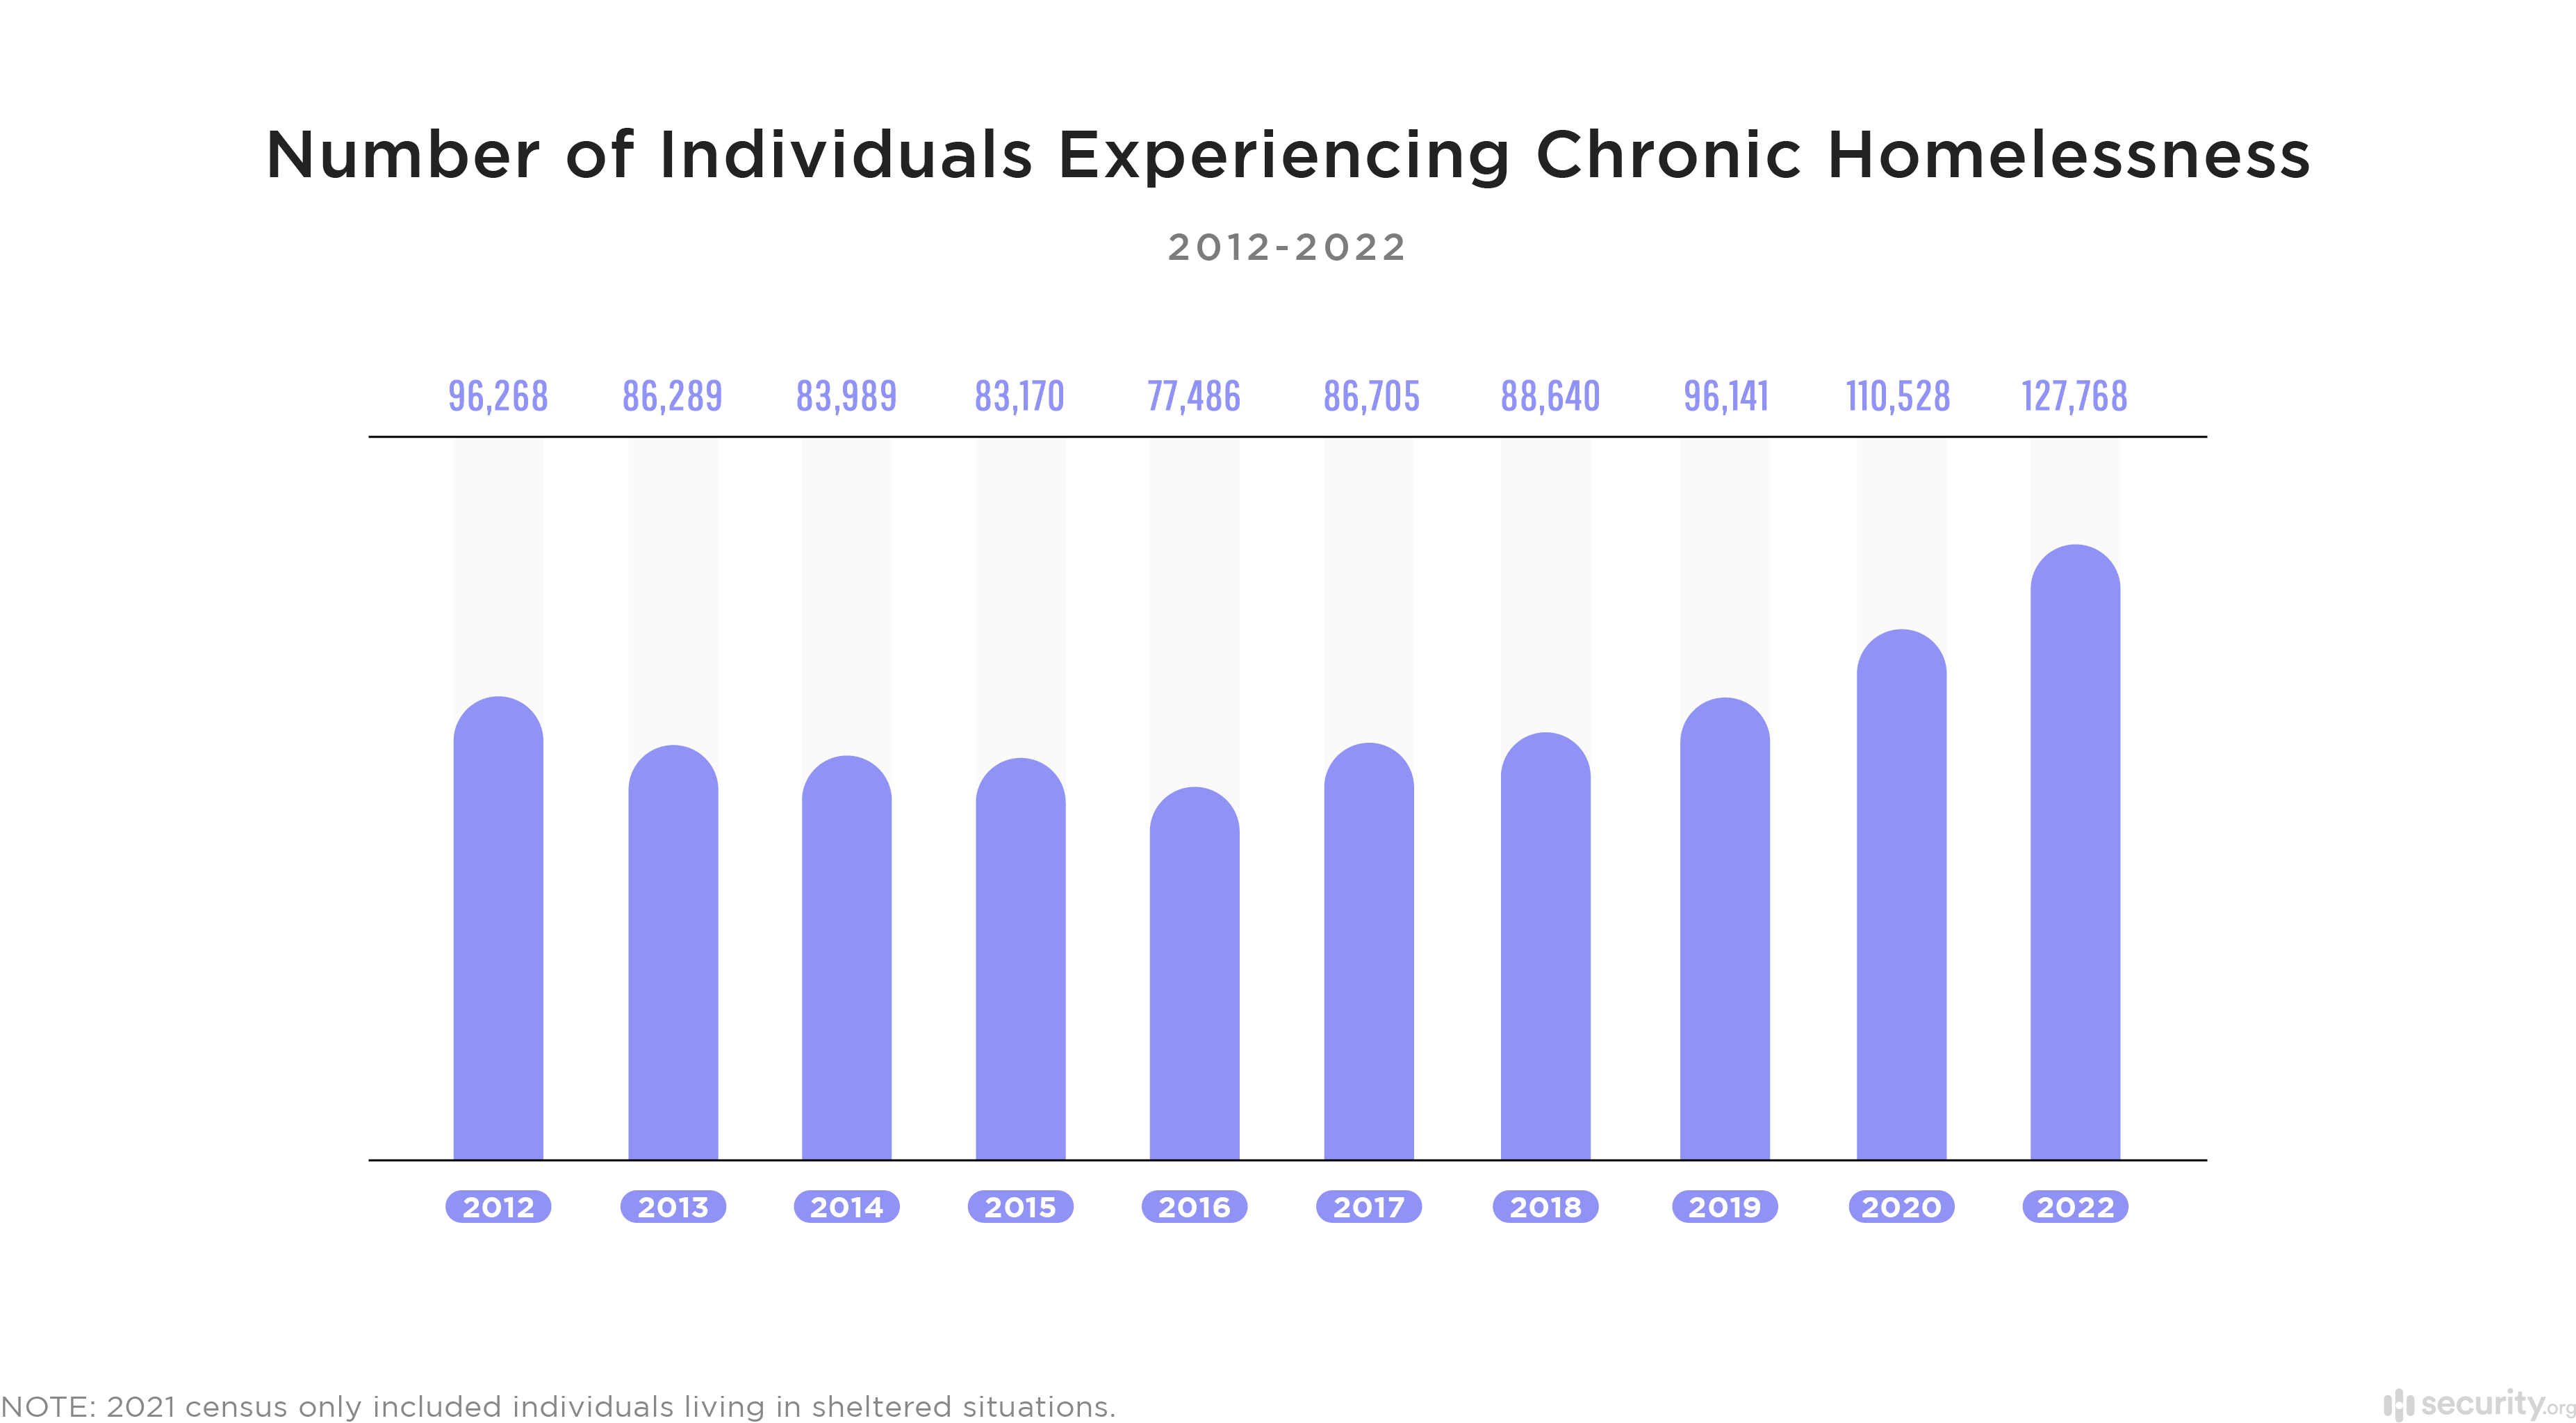 Number of Individuals Experiencing Chronic Homelessness